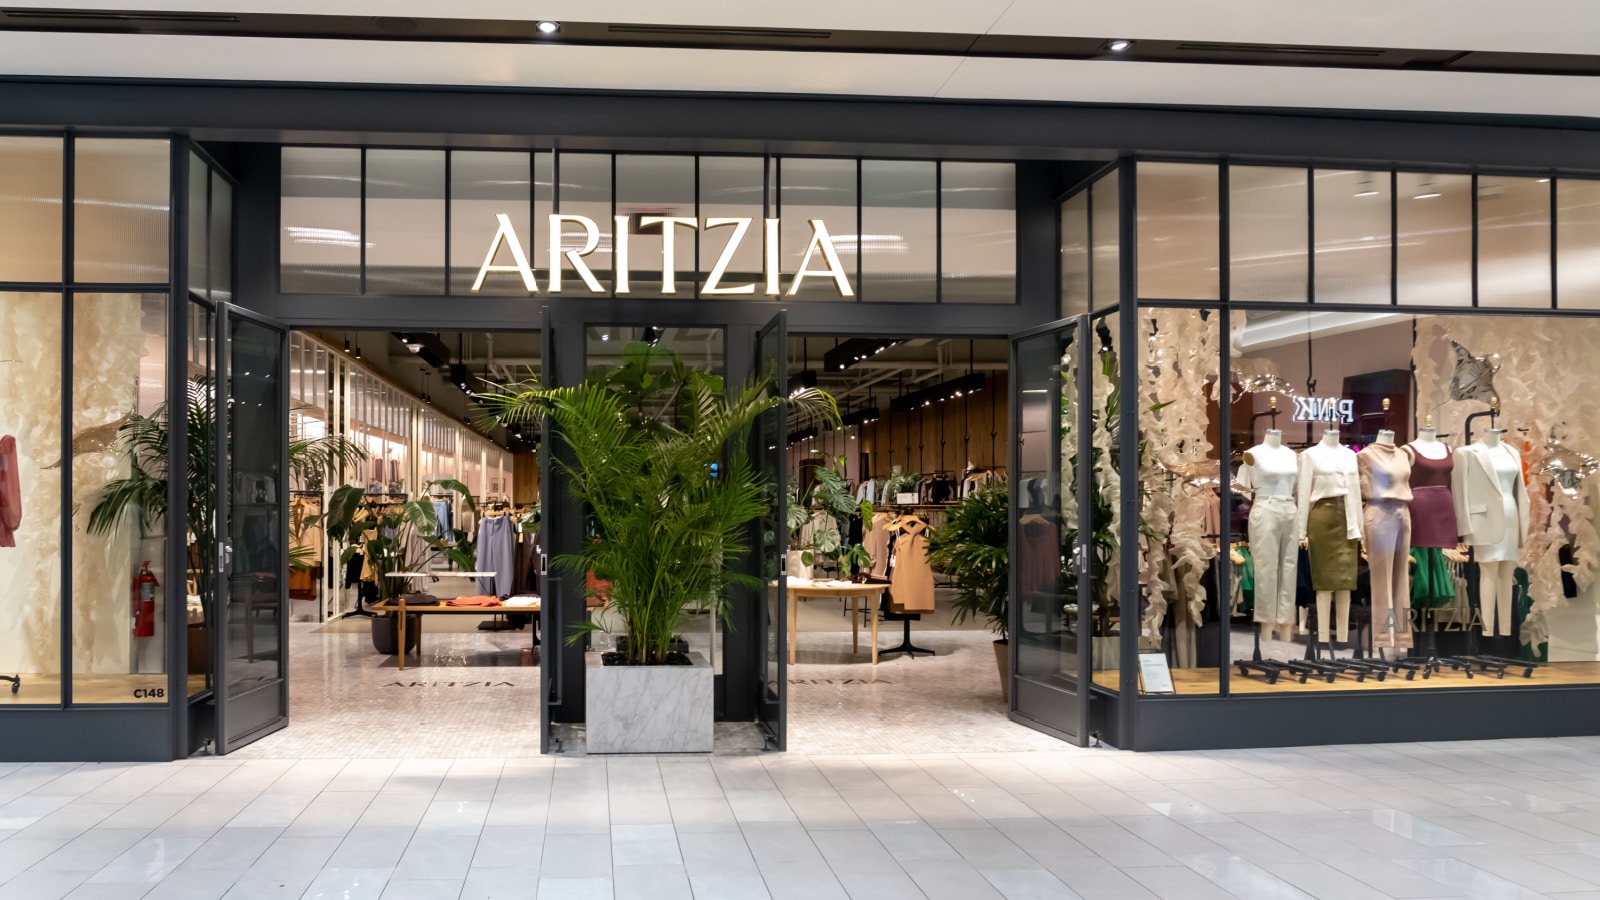 East Rutherford, NJ, USA - August 16, 2022: An Aritzia store at the American Dream mall in East Rutherford, NJ, USA. Aritzia Inc. is a Canadian women's fashion brand.